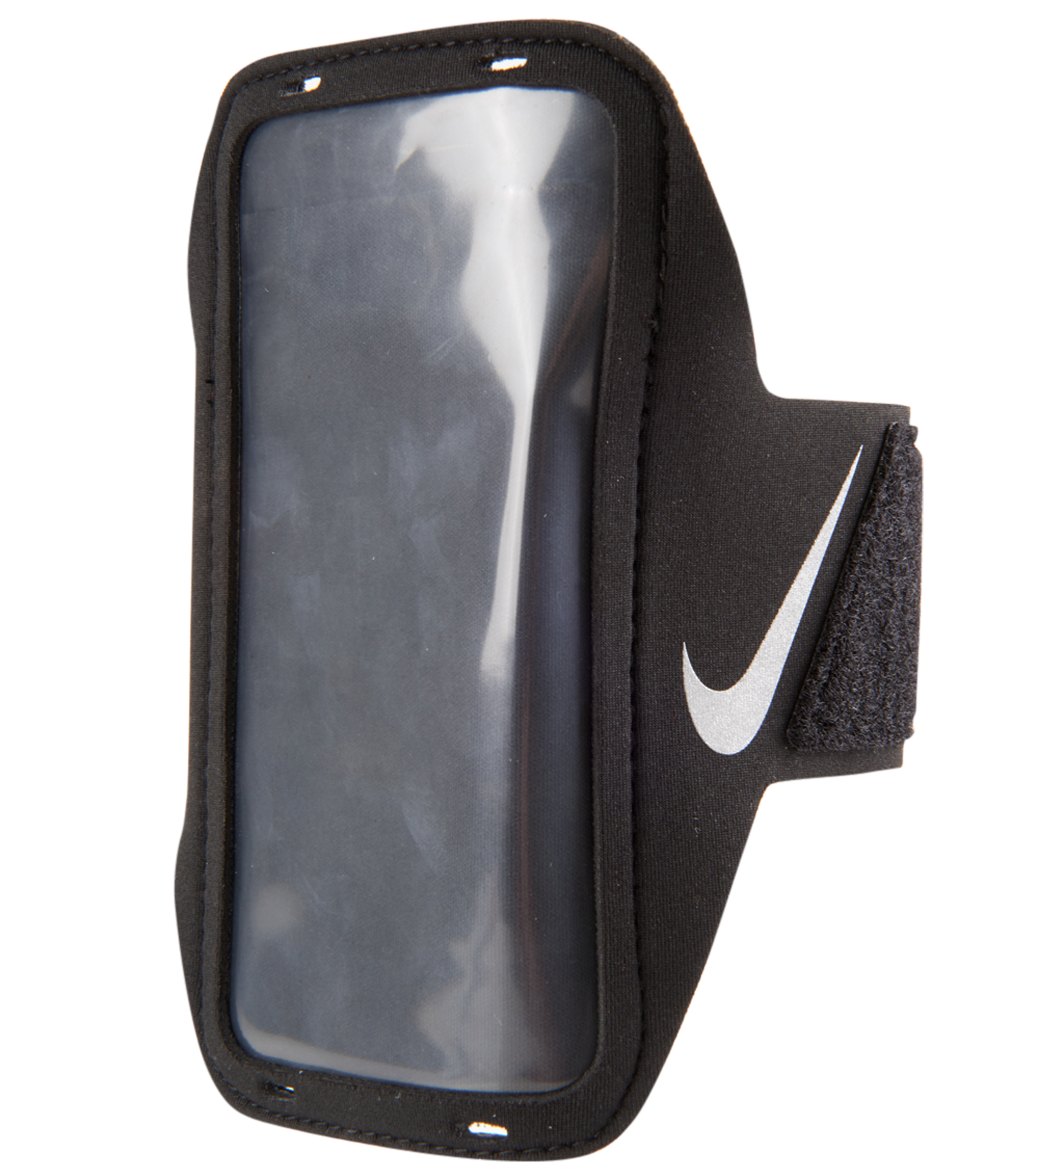 Nike Lean Arm Band for Phones at SwimOutlet.com